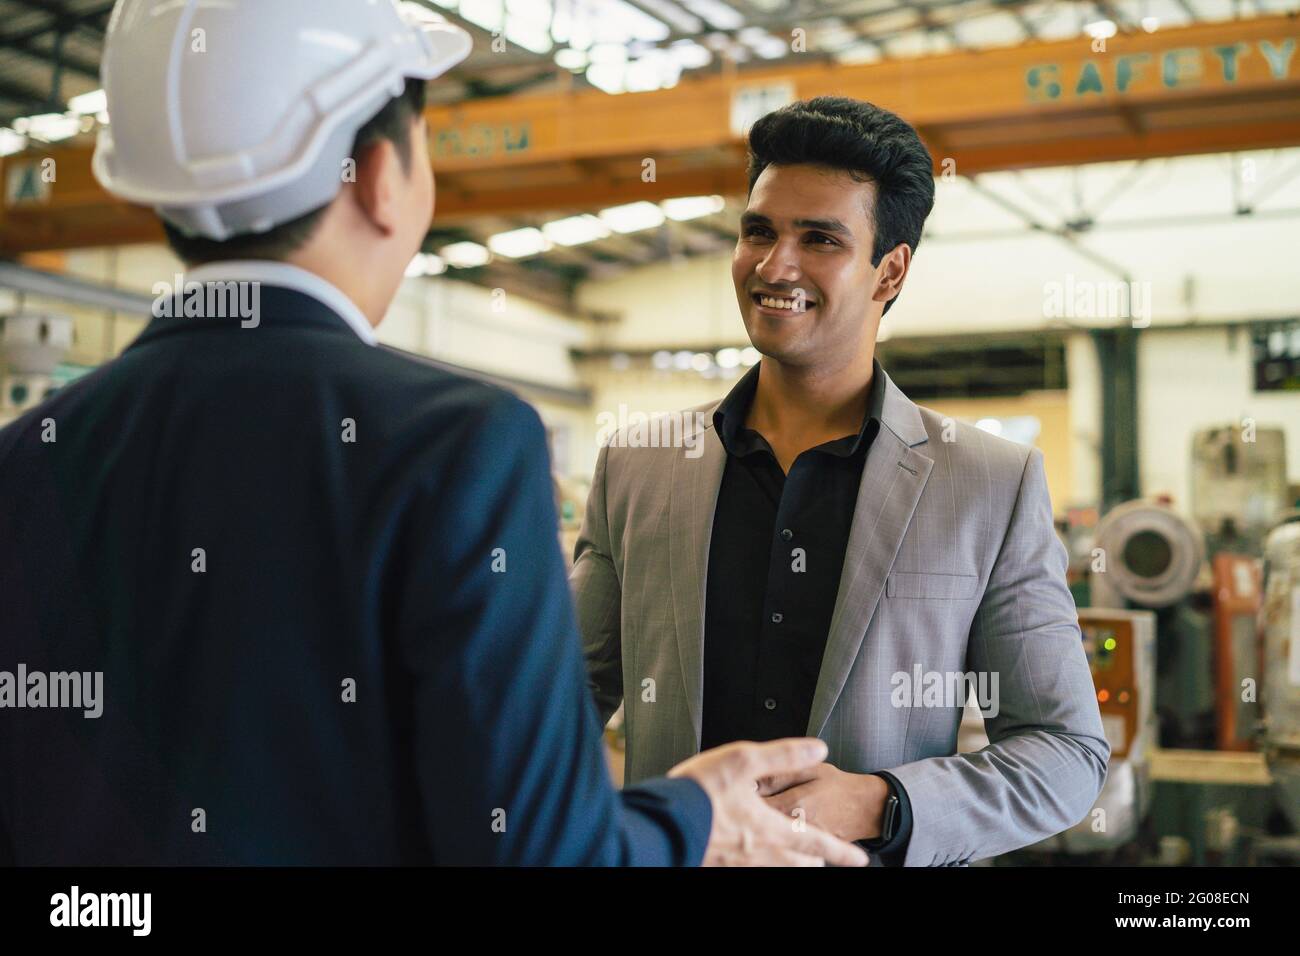 30s young Asian businessman in formal suit and hard hat showing foreign business partner in factory background. Business partnership and team work success concept Stock Photo